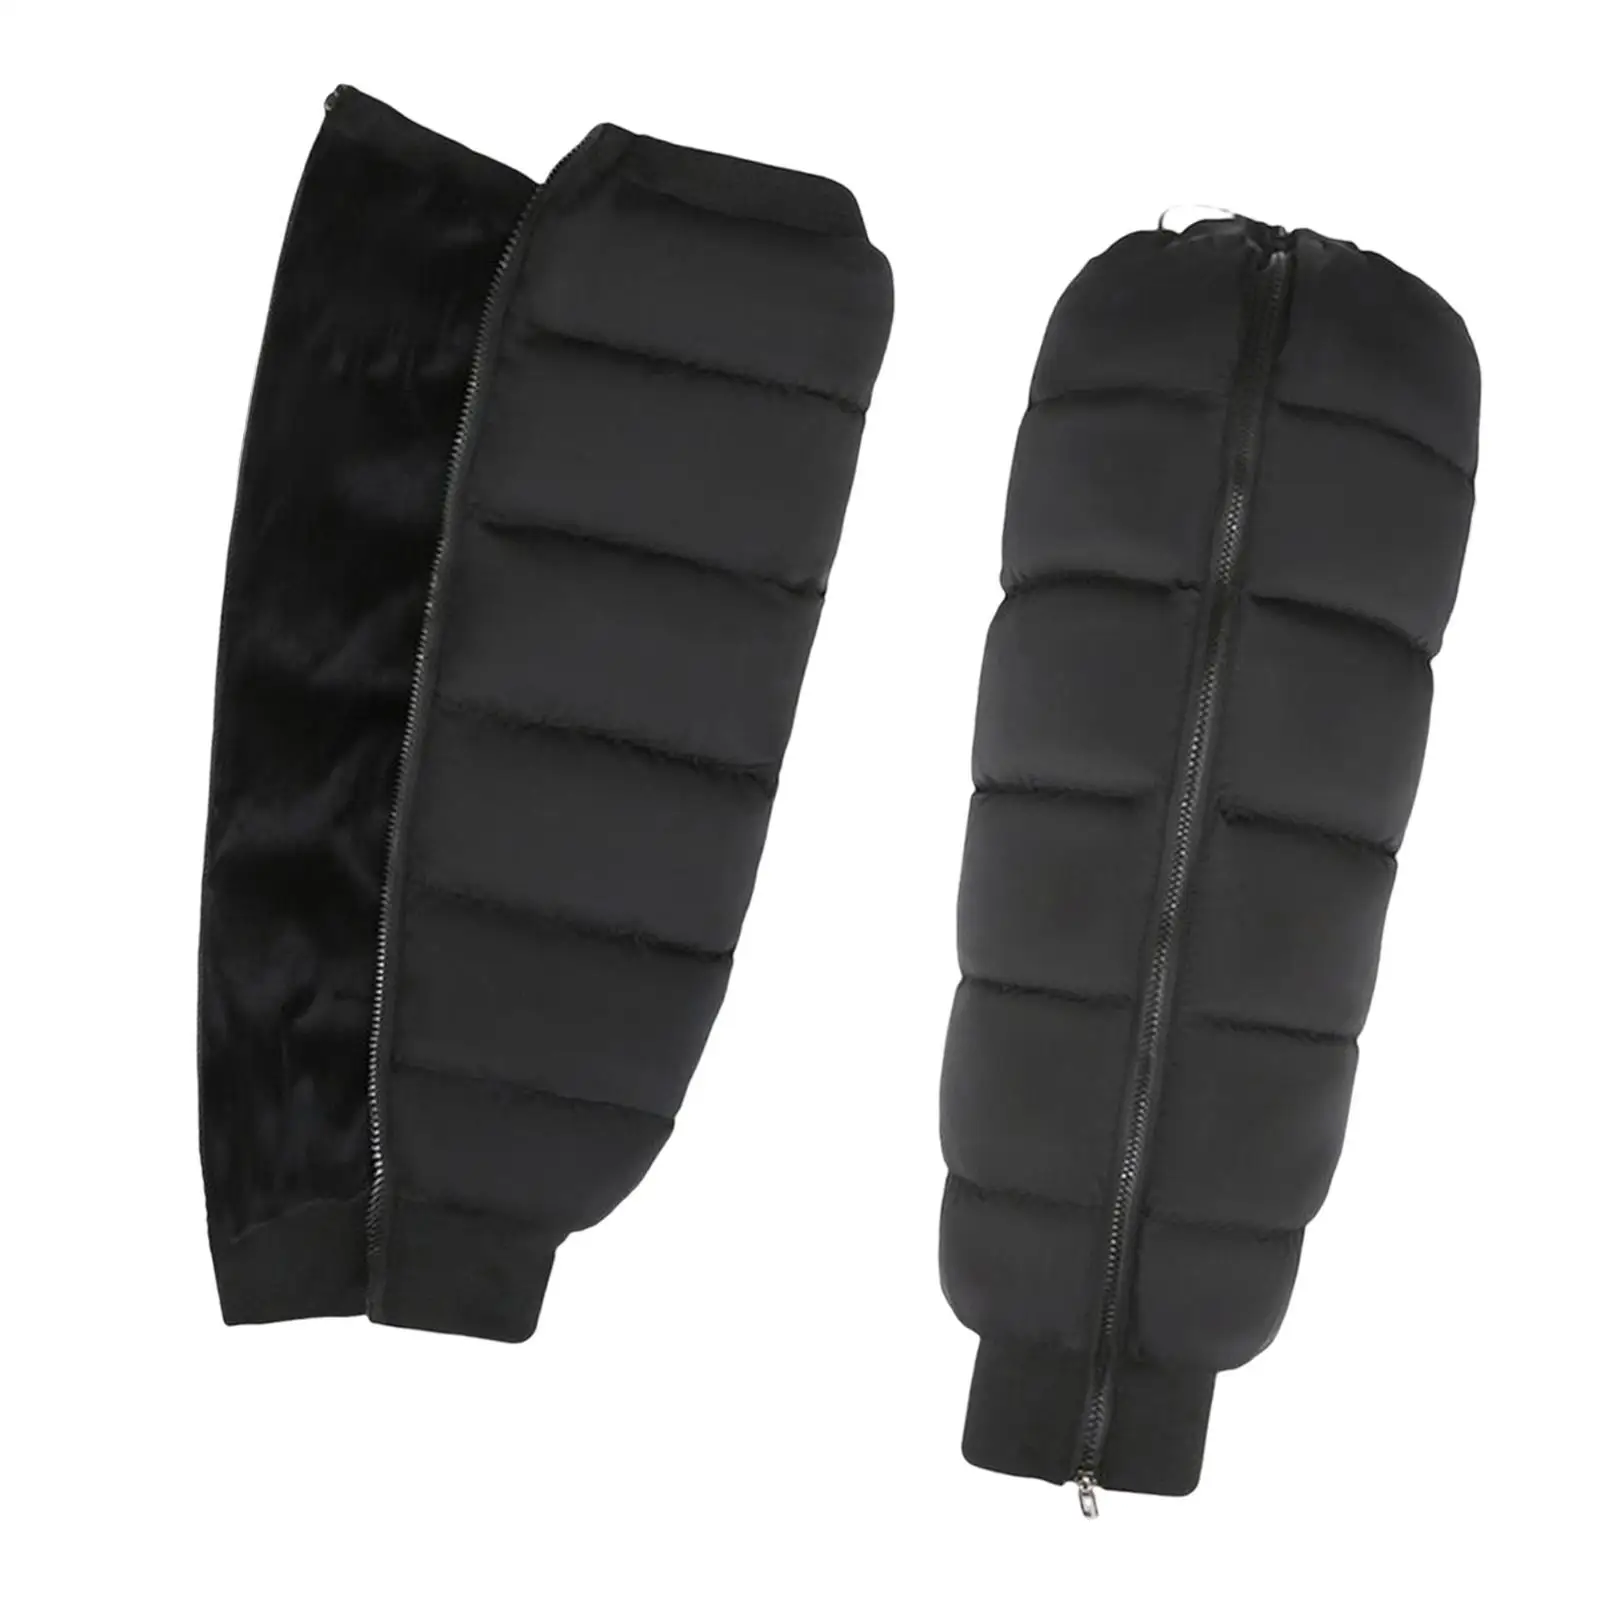 2Pcs Winter Knee Pads Protective Leggings Leg Sleeve Windproof for Skiing